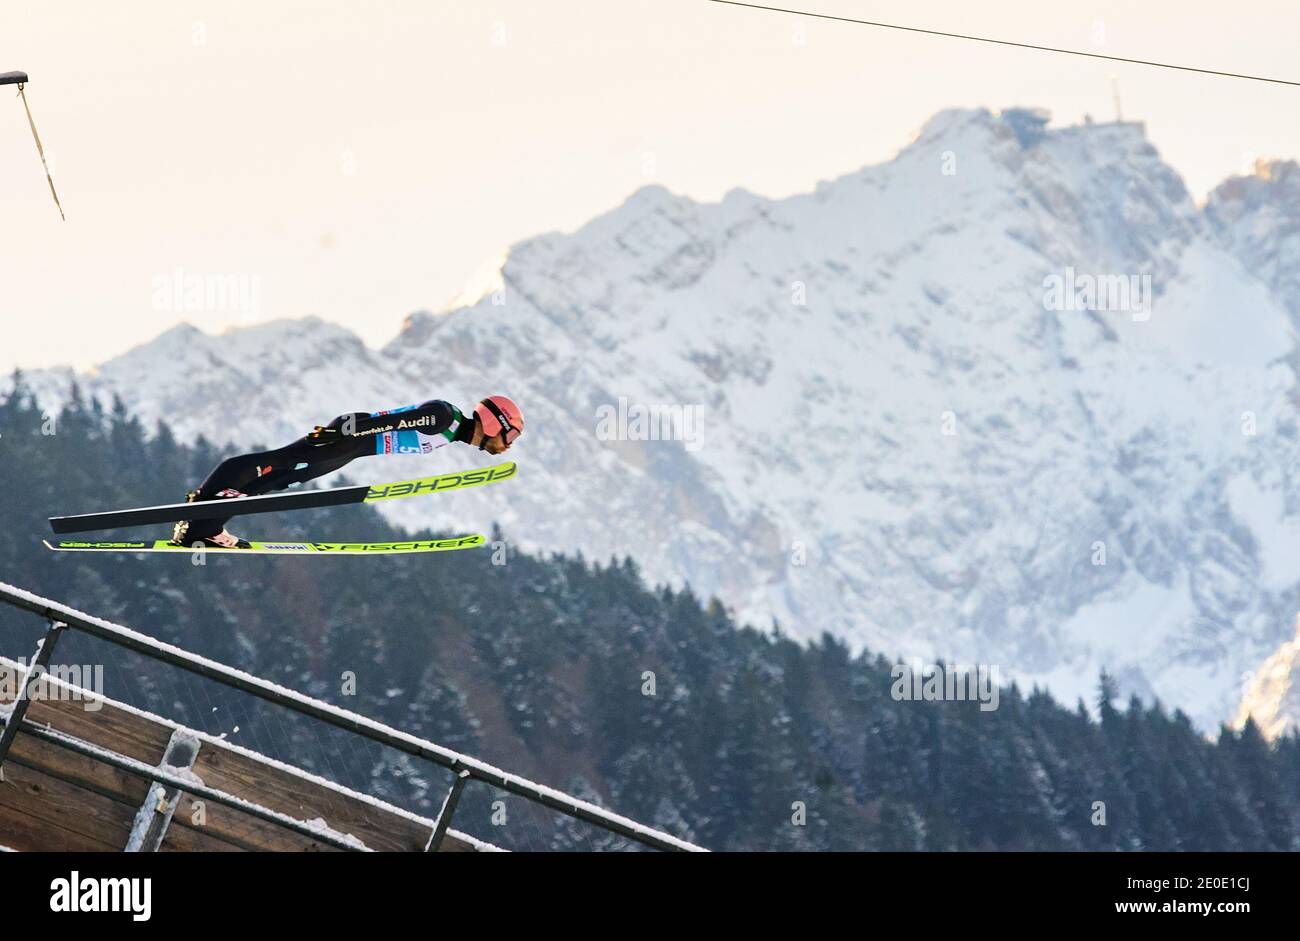 In front of Zugspitze mountain: Pius PASCHKE, GER in action at the Four Hills Tournament Ski Jumping at Olympic Stadium, Grosse Olympiaschanze in Garmisch-Partenkirchen, Bavaria, Germany, December 31, 2020.  © Peter Schatz / Alamy Live News Stock Photo